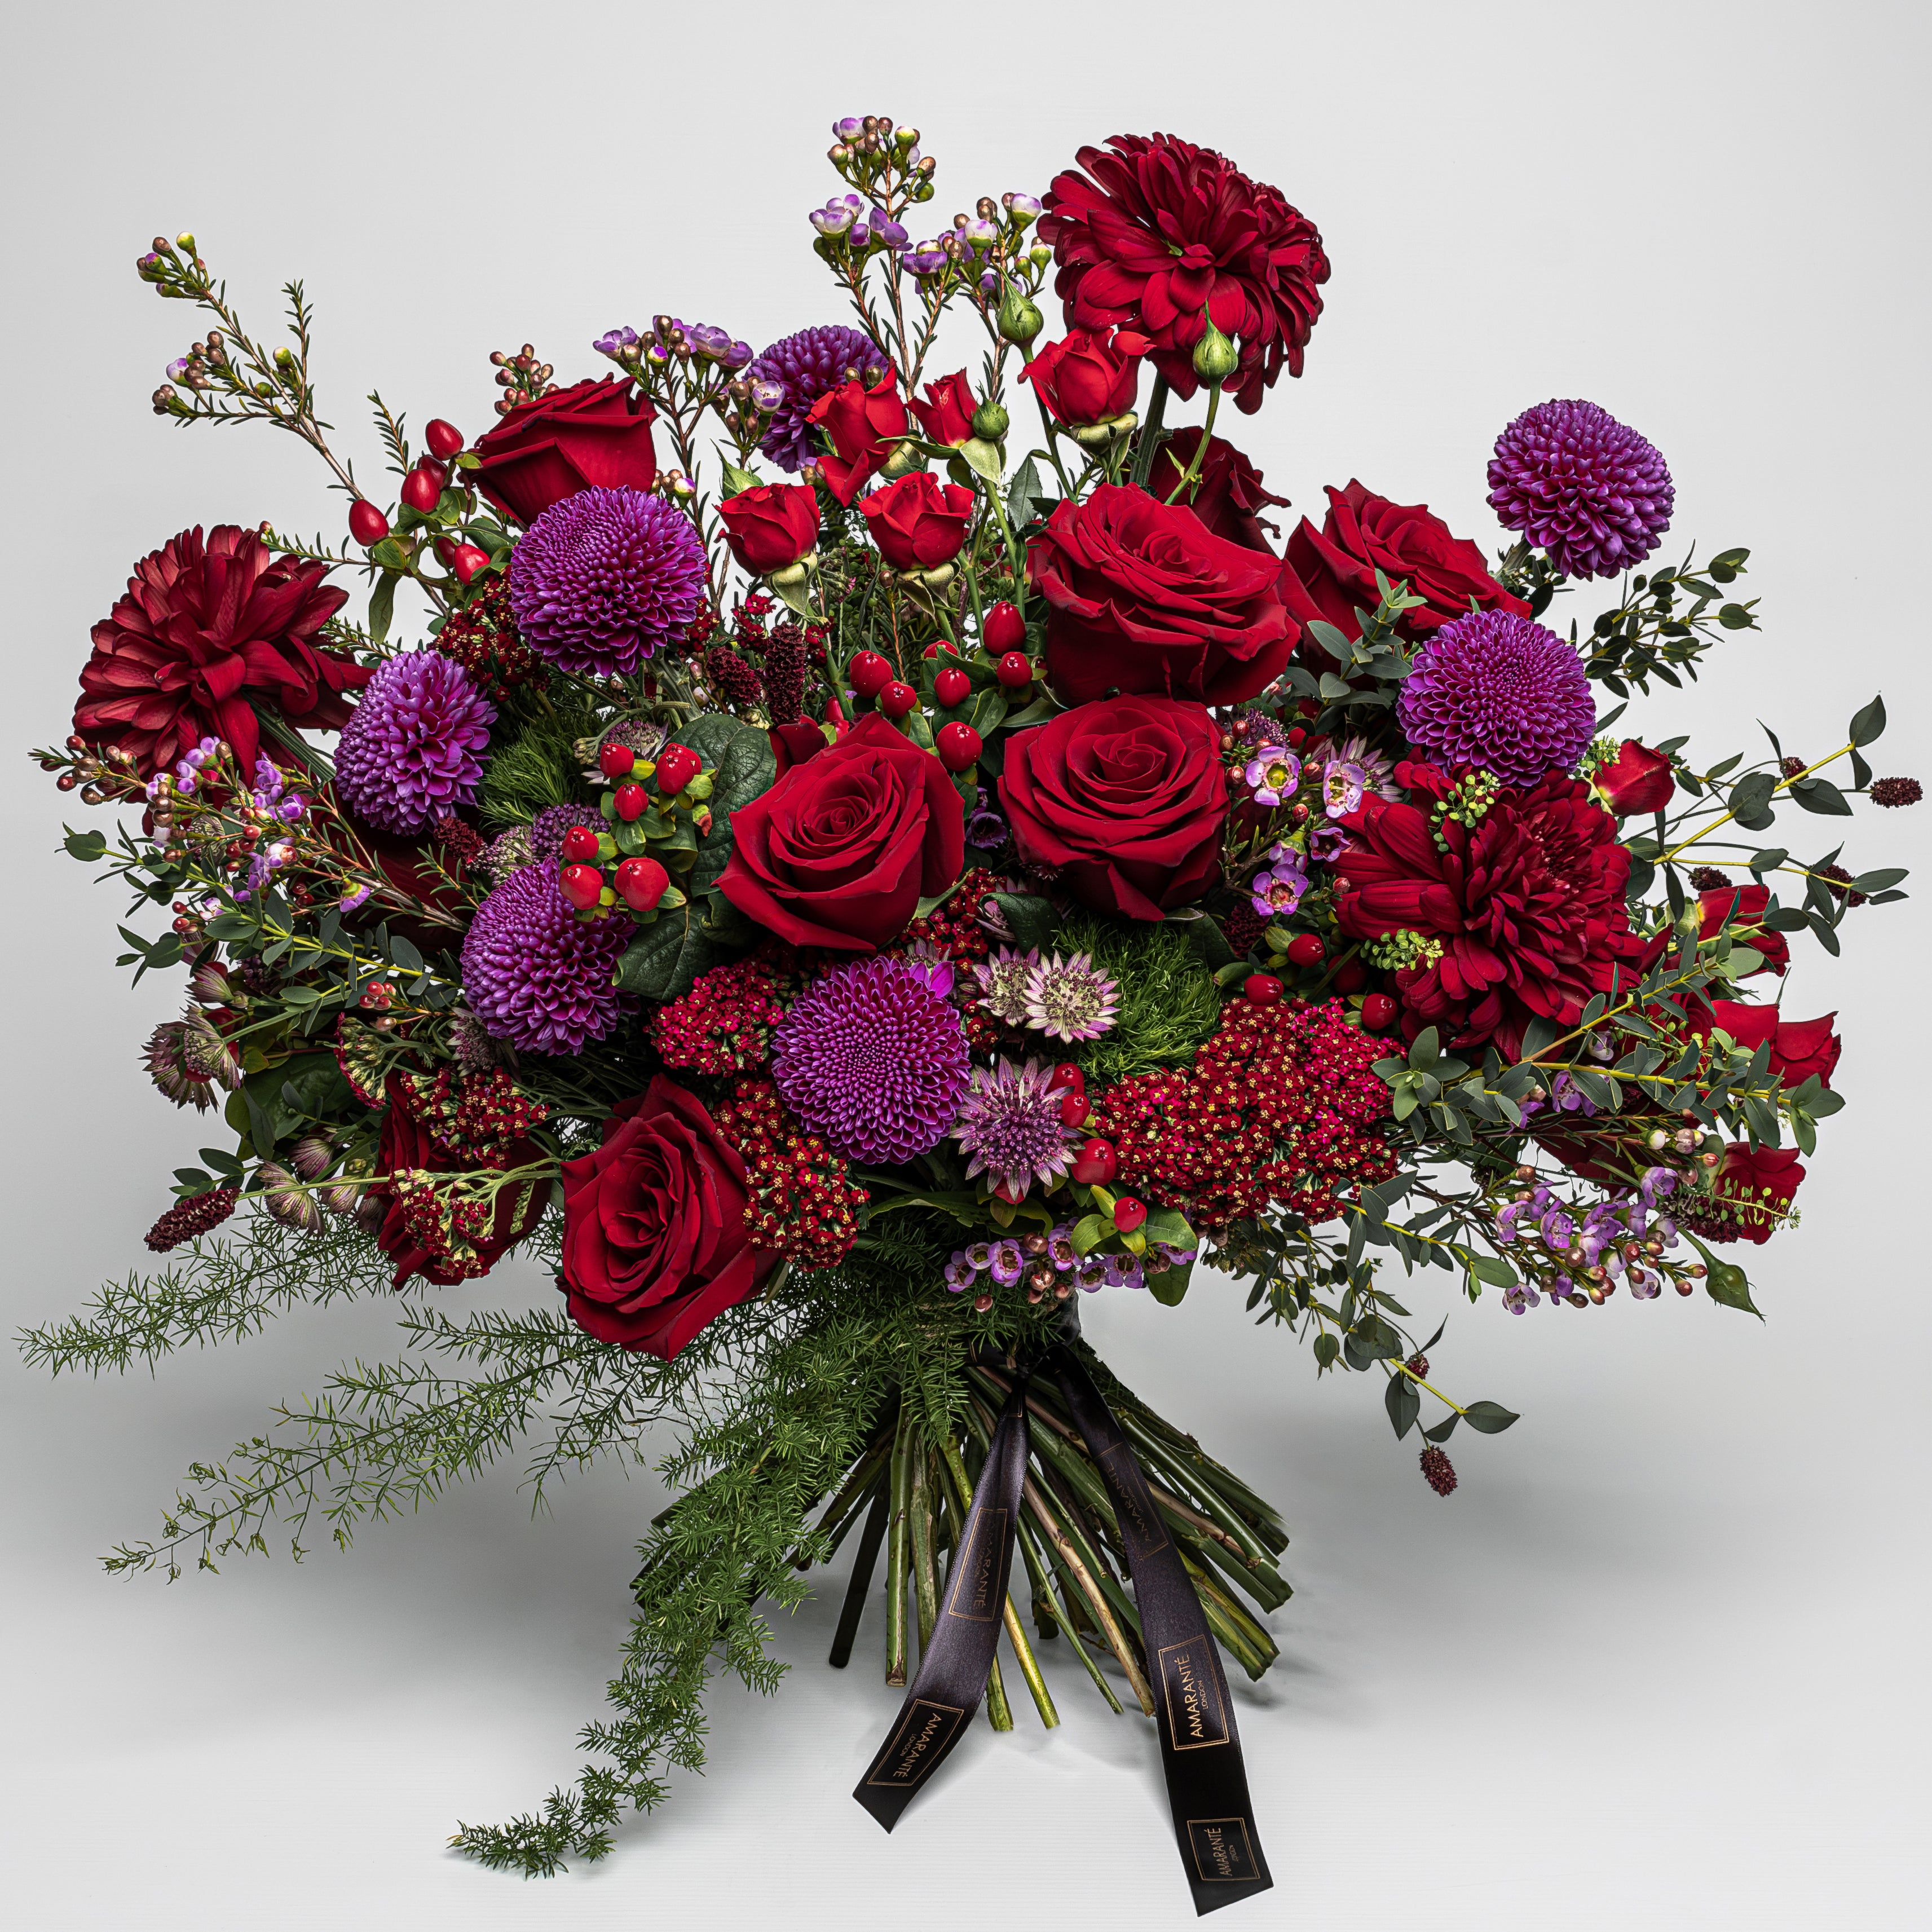 Crimson Lust Fresh Flower Bouquet features deep reds and rich purples, each flower meticulously selected to create a luxurious tapestry ideal for International Women&#39;s Day and Mother&#39;s Day, Valentine&#39;s Day and other important moments. This luxury floral arrangement is dominated by the romantic allure of velvety red roses, their full blooms symbolising love and respect. Dark red dahlias add a lush, textural contrast with their intricate petals.